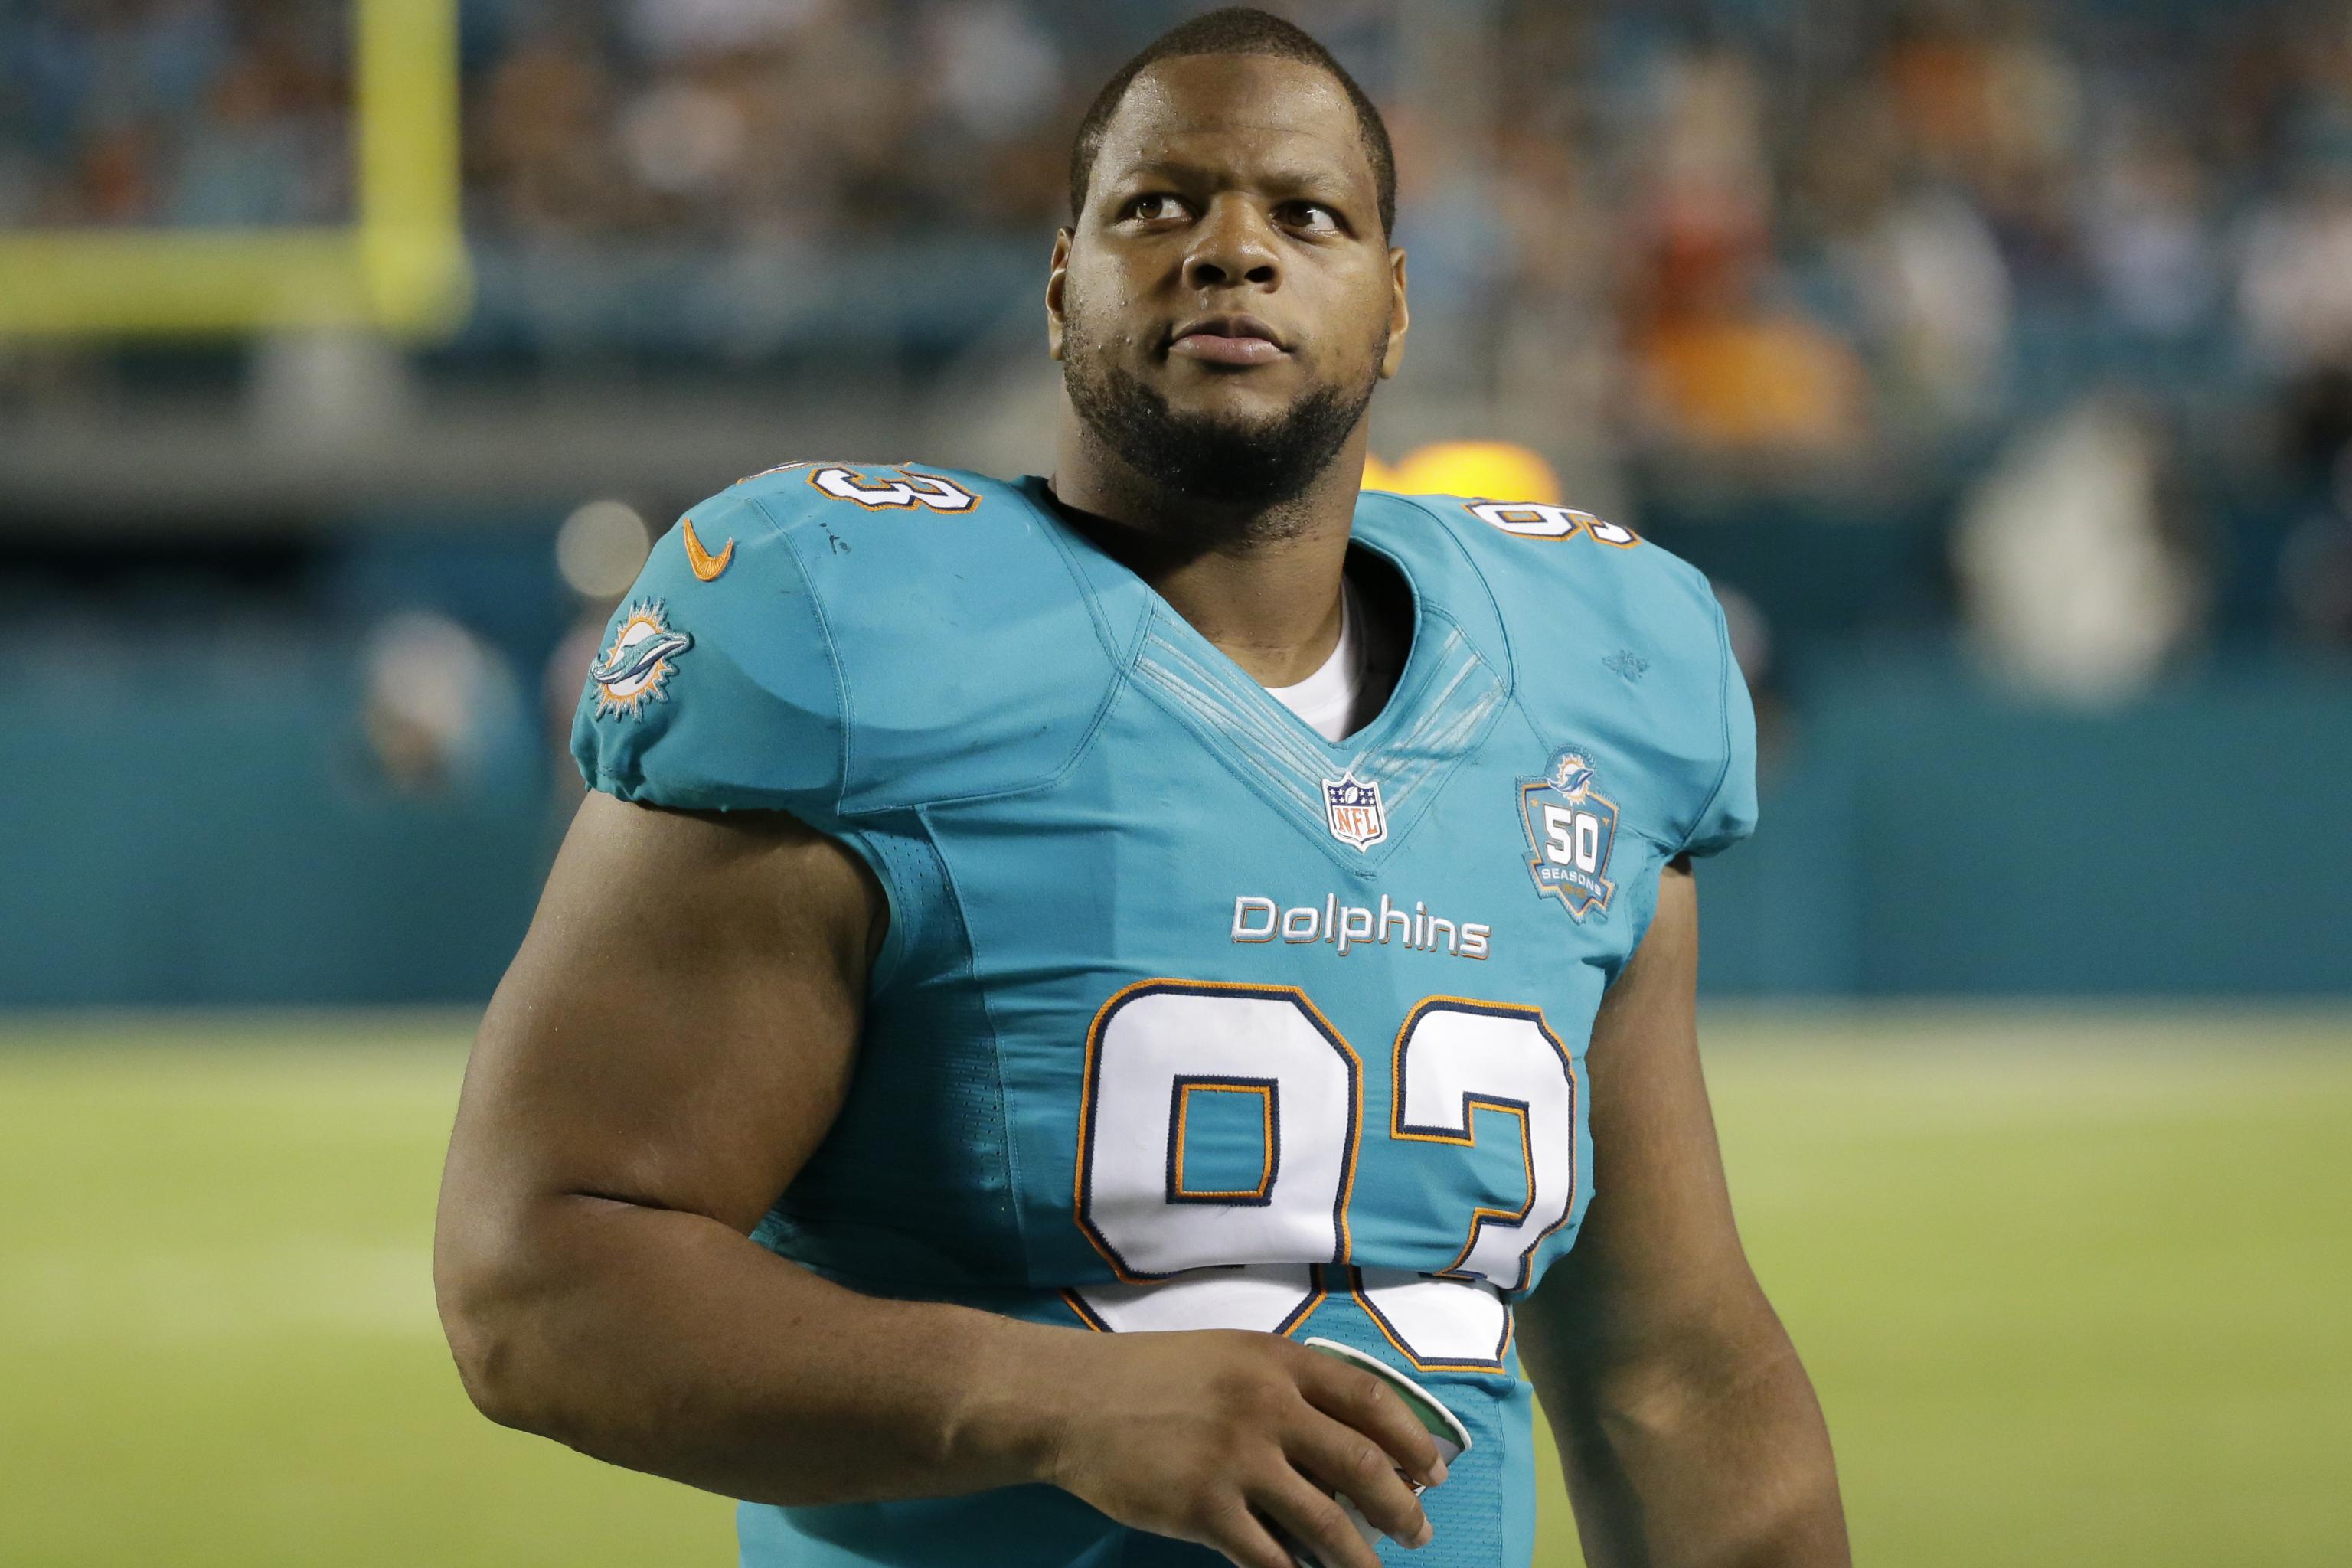 Ndamukong Suh Injury: Updates on Dolphins Star's Ankle and Return